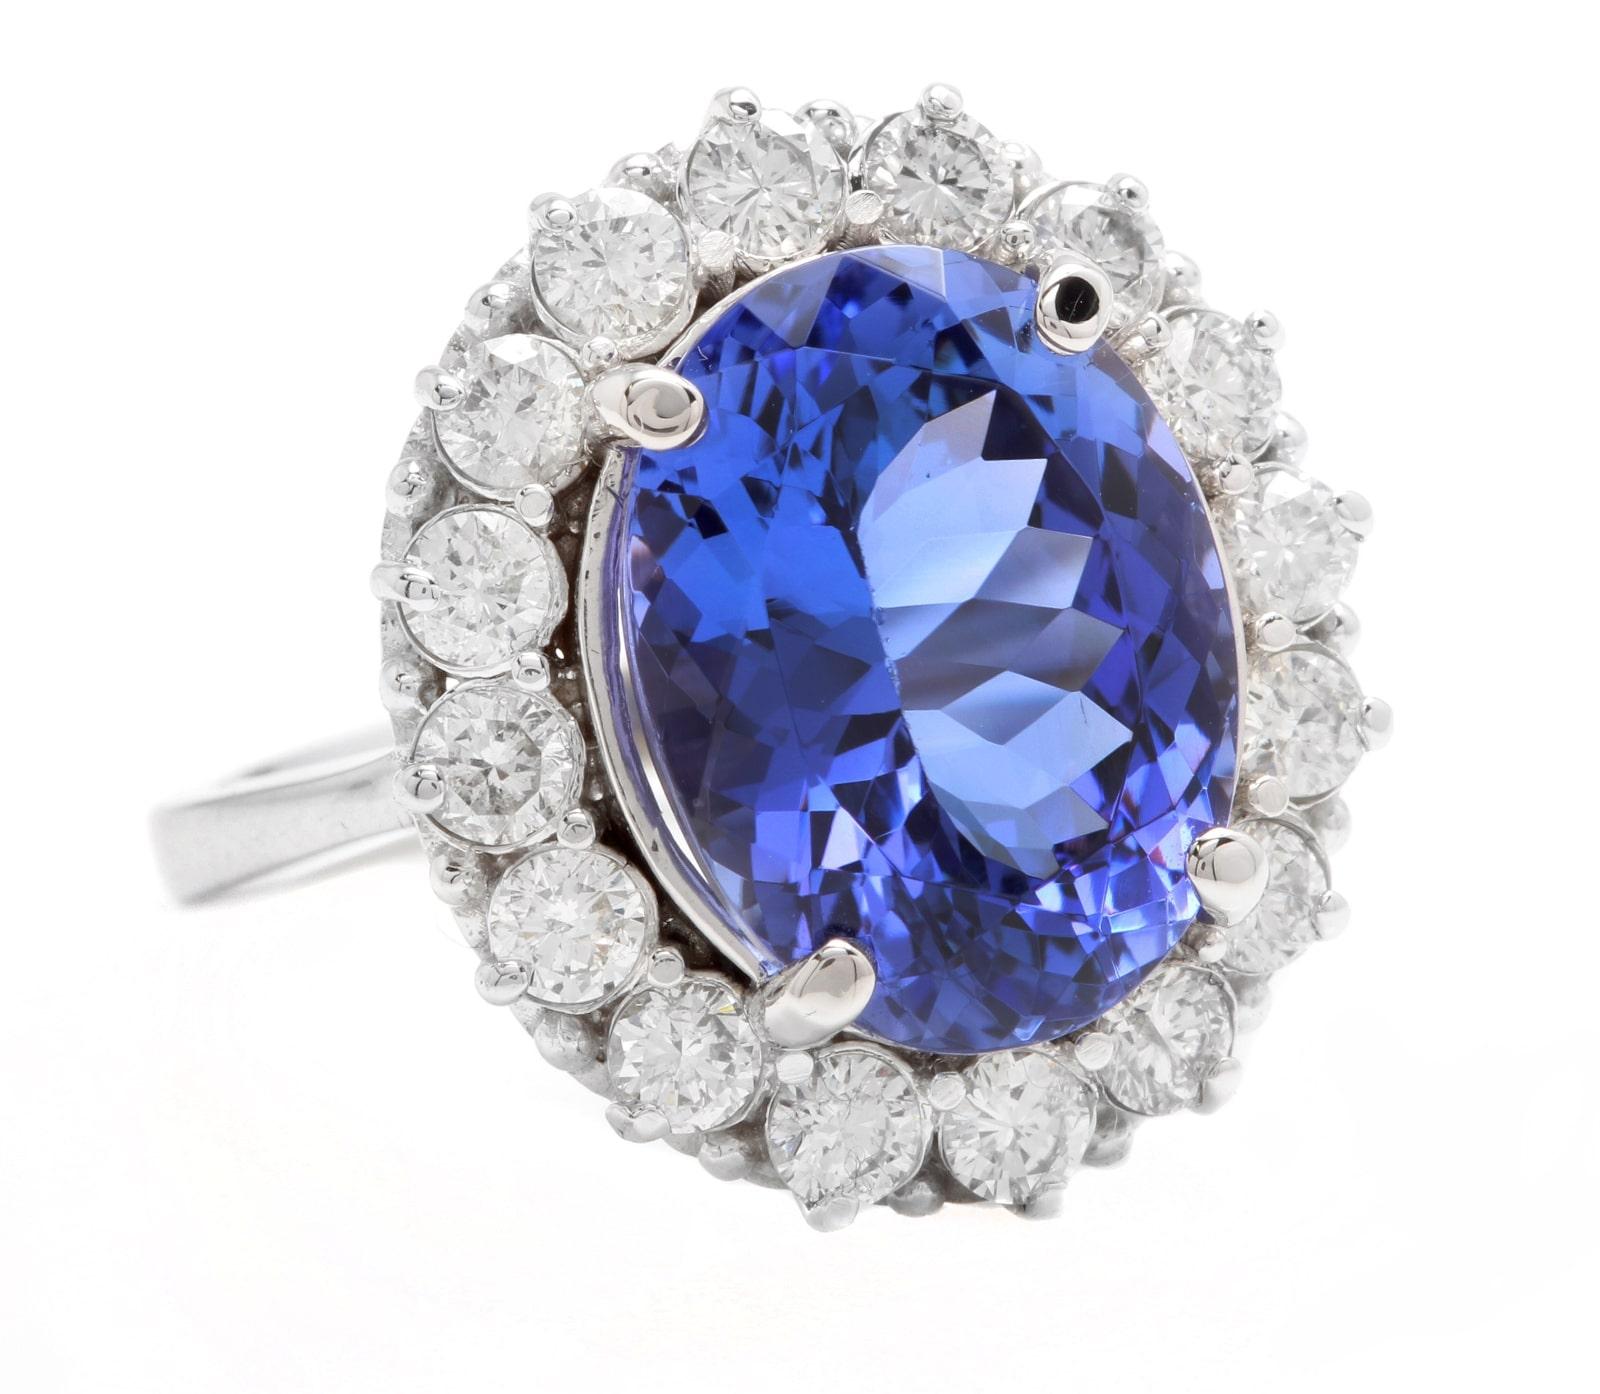 9.90 Carats Natural Very Nice Looking Tanzanite and Diamond 18K Solid White Gold Ring

Suggested Replacement Value: Approx.  $10,000.00

Total Natural Oval Cut Tanzanite Weight is: Approx. 8.50 Carats 

Tanzanite Measures: Approx.  14.00 x 12.00mm
